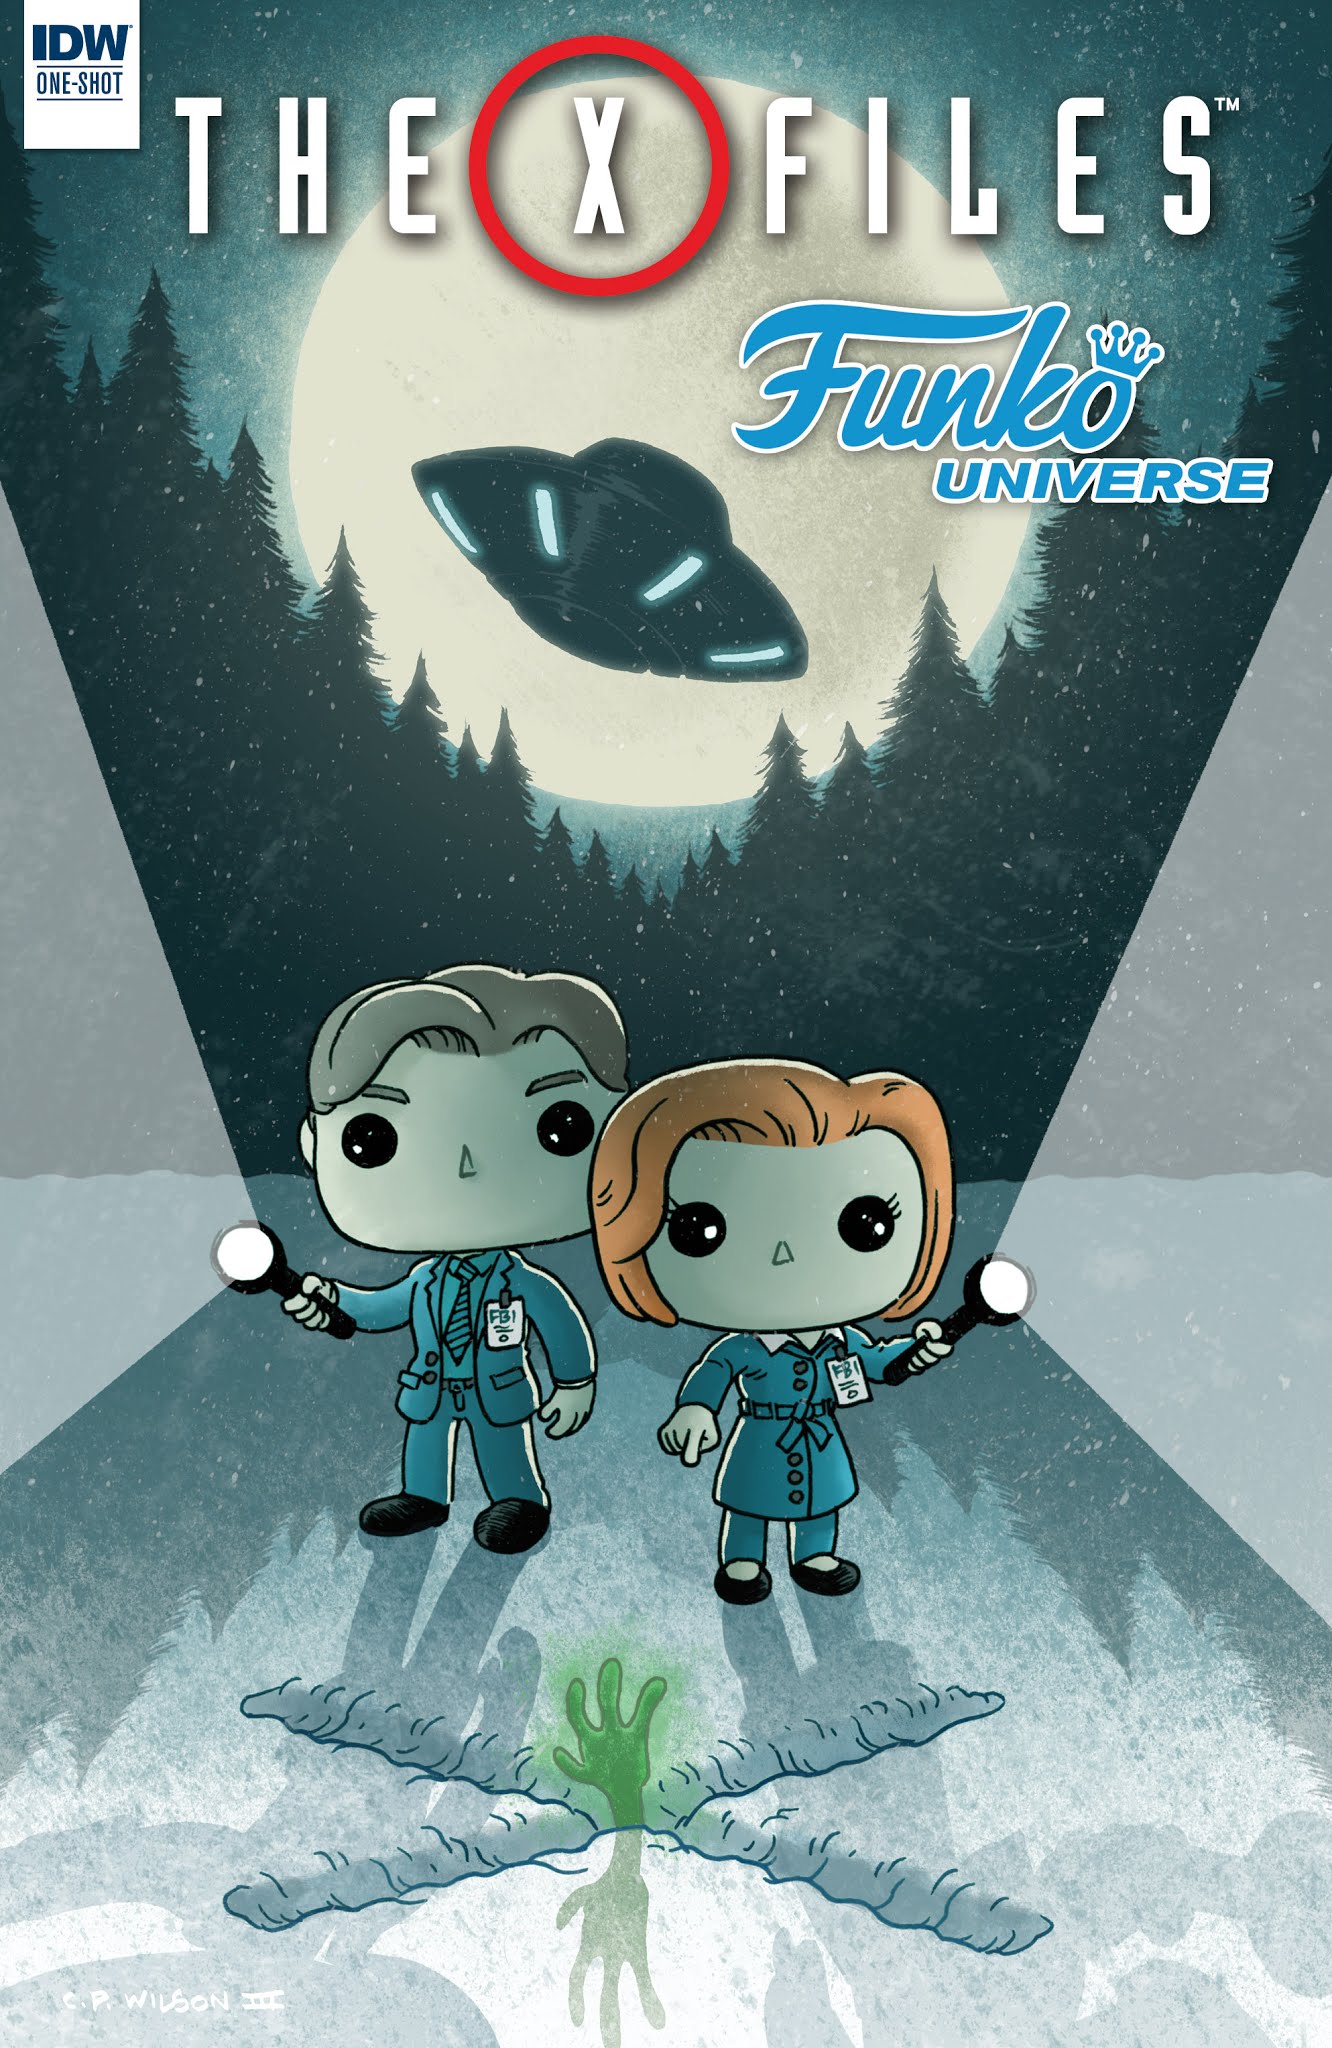 Read online The X-Files Funko Universe comic -  Issue # Full - 1